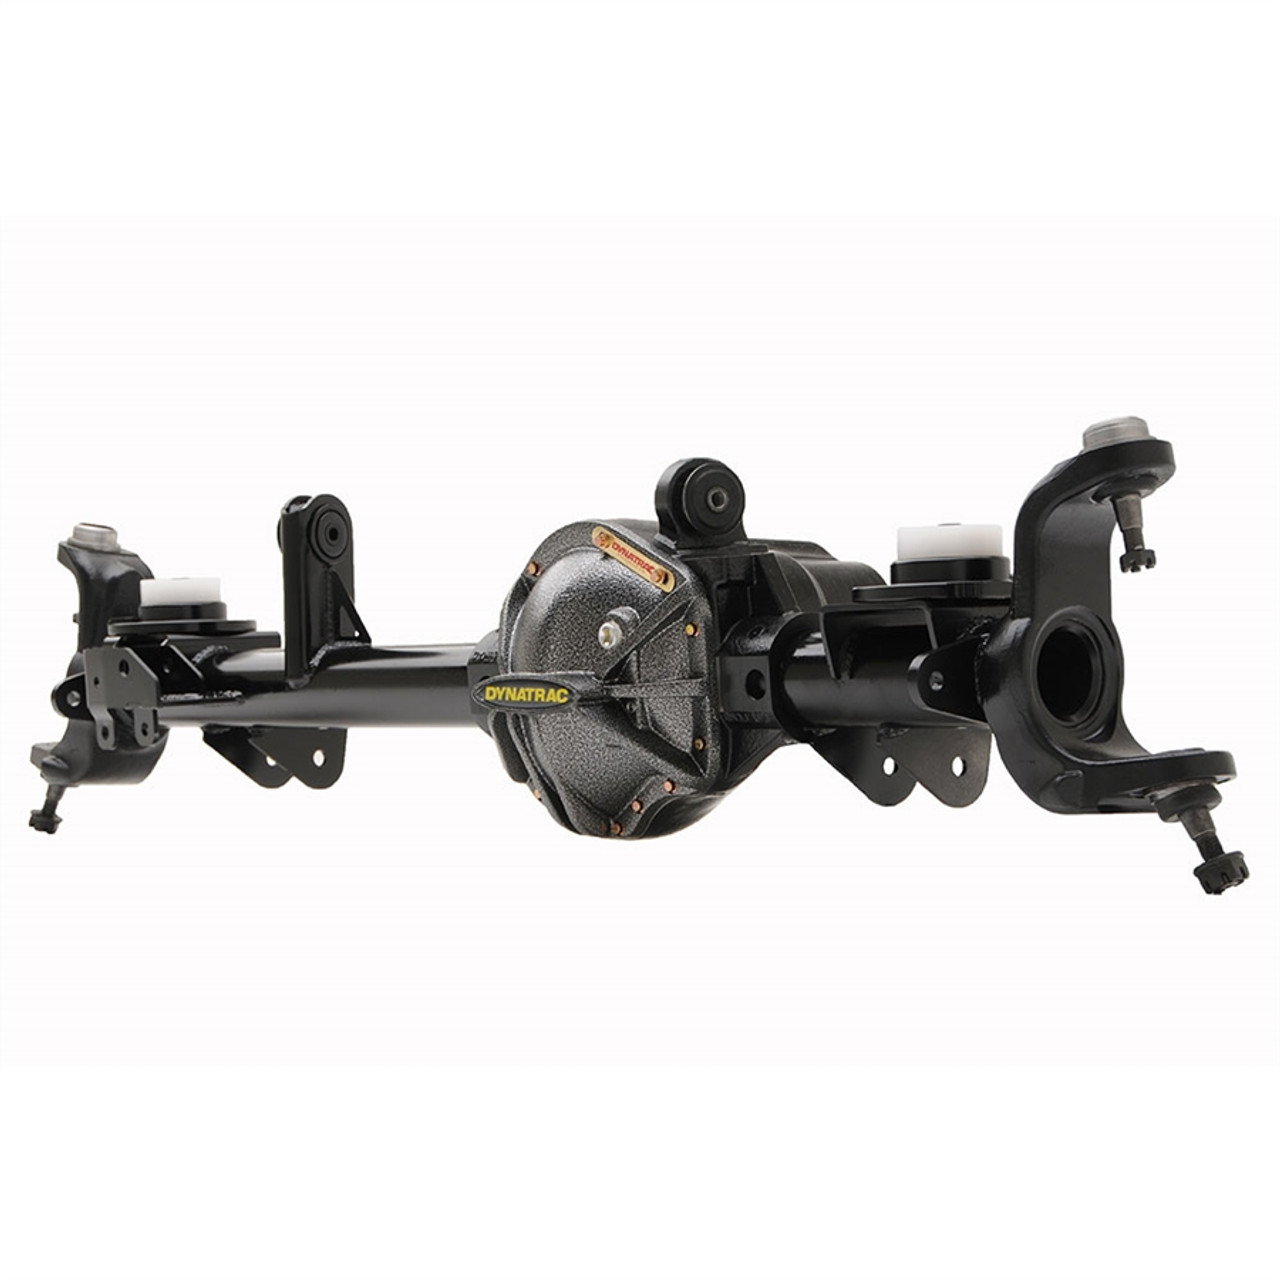 Dynatrac ProRock 44 Front Axle for Jeep JK